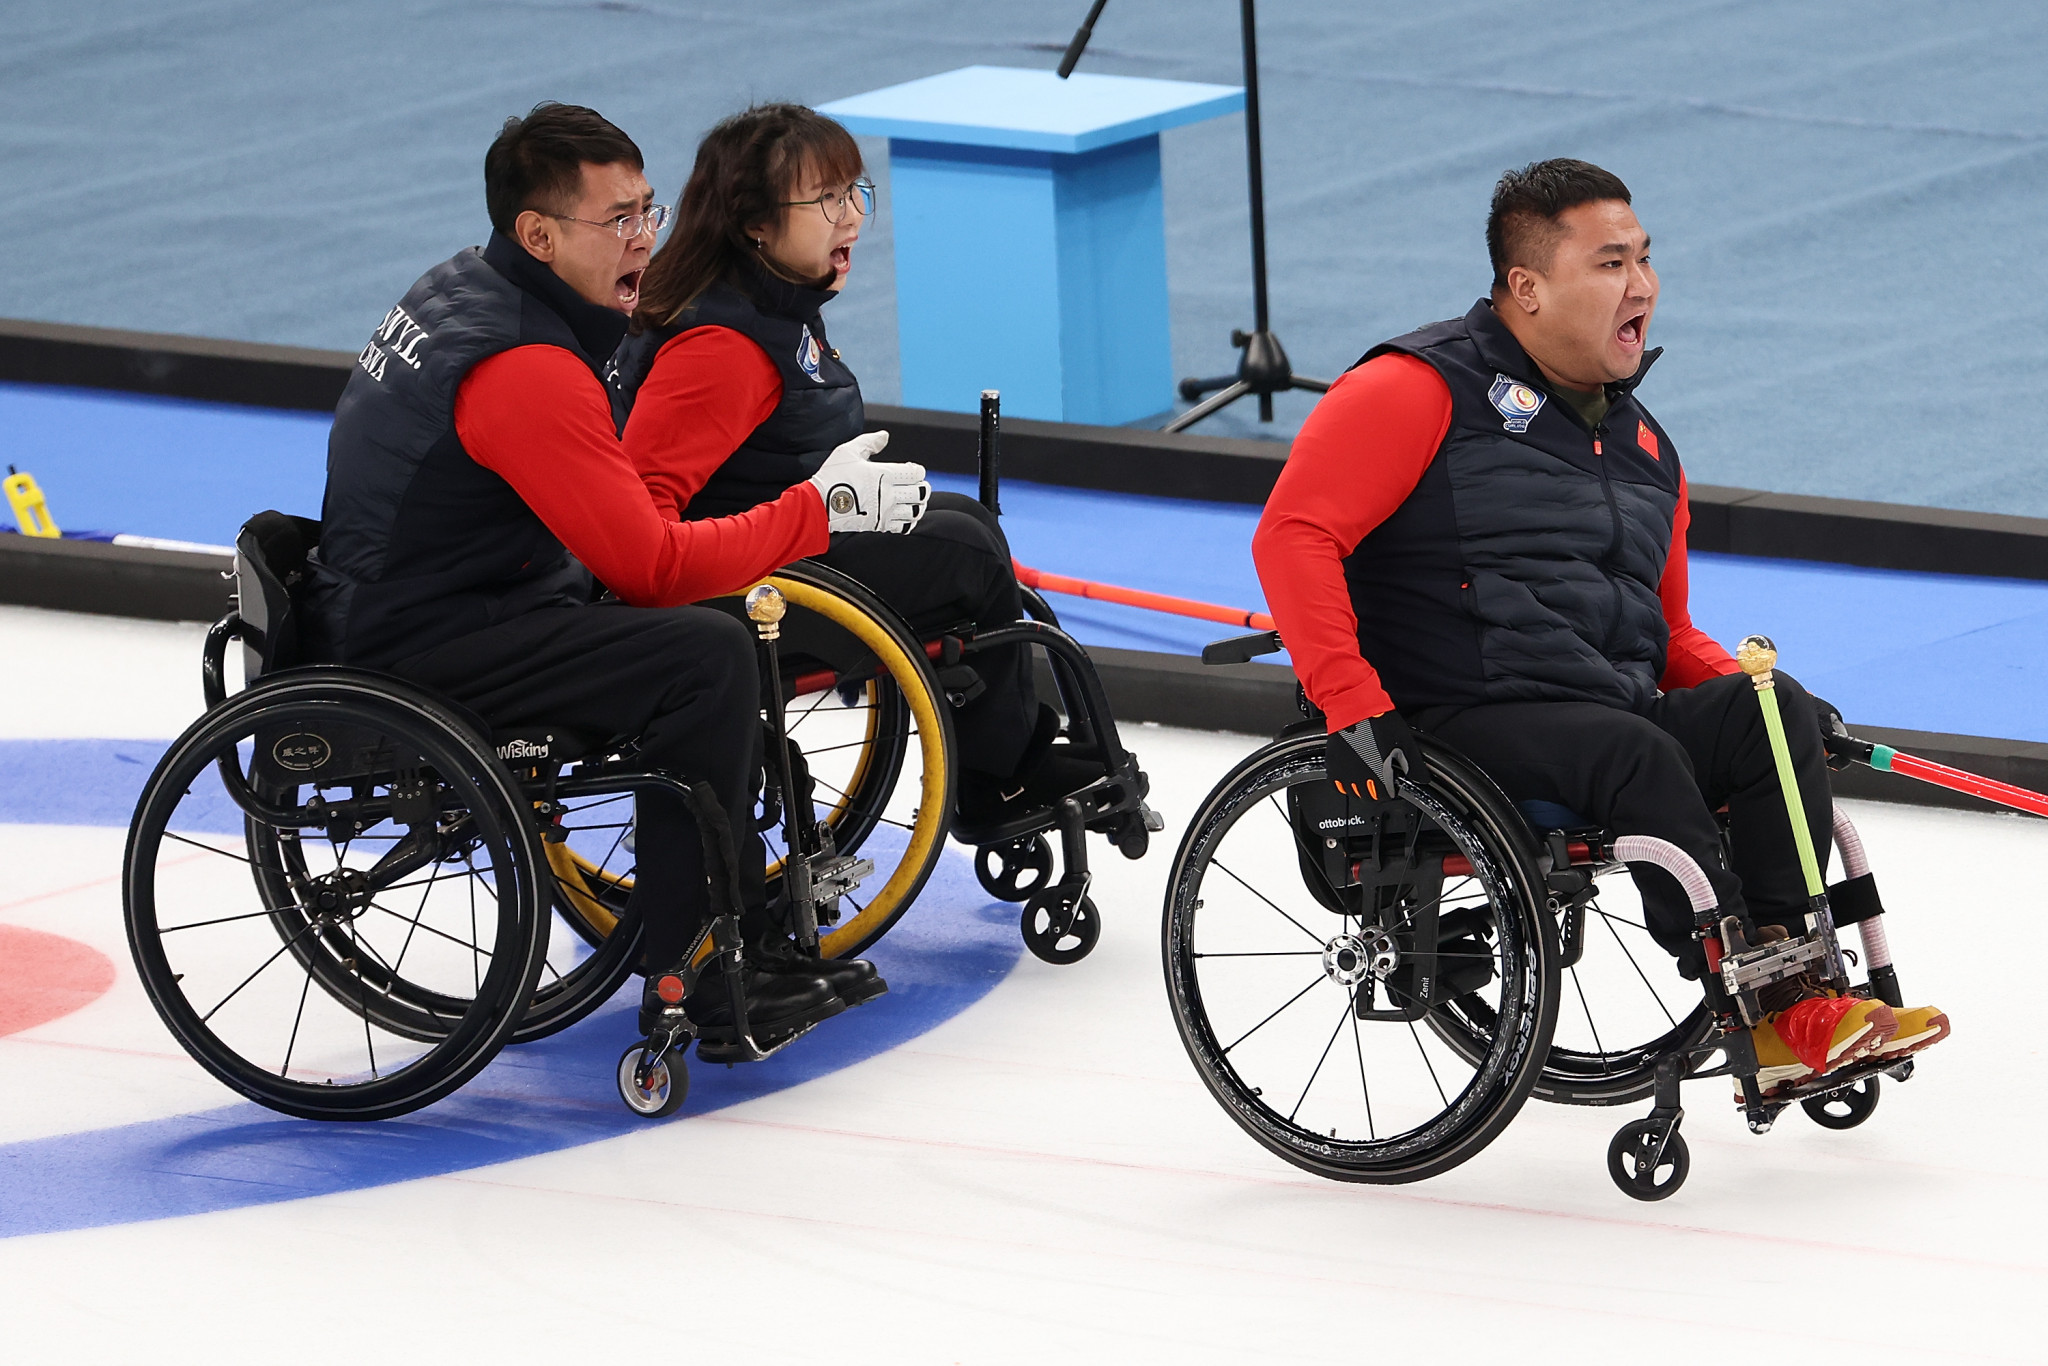 Wang Haitao's China cruised to a 10-2 victory against the United States in a wheelchair curling match at Beijing 2022 ©Getty Images